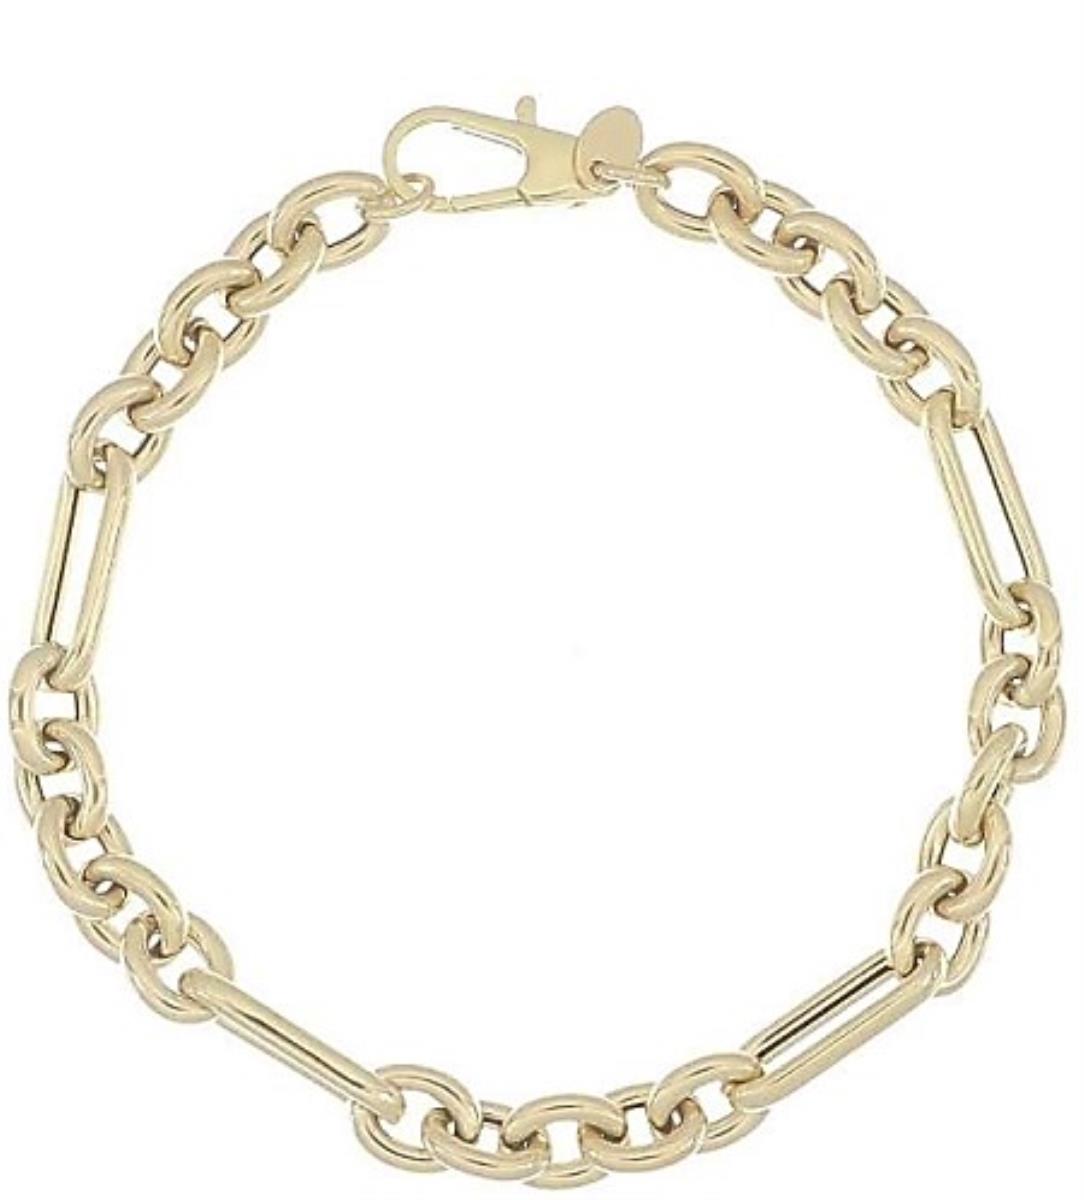 14K Yellow Gold 7.10MM High Polish Alternating Paperclip and Rolo Link Chain Bracelet, 7.5"